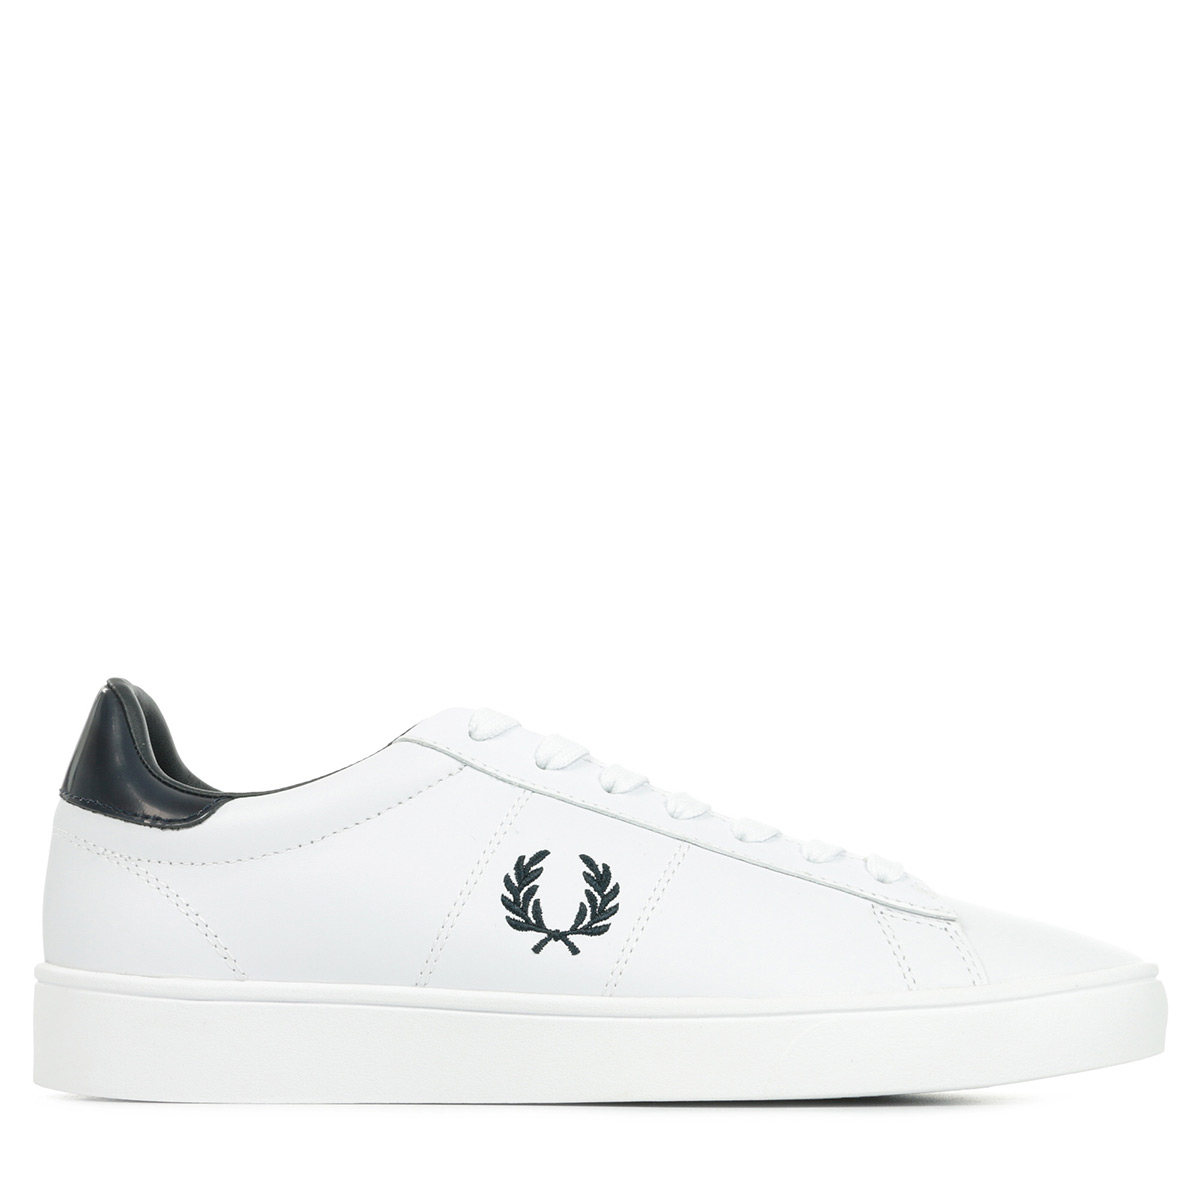 Fred Perry "Spencer Leather Tab"